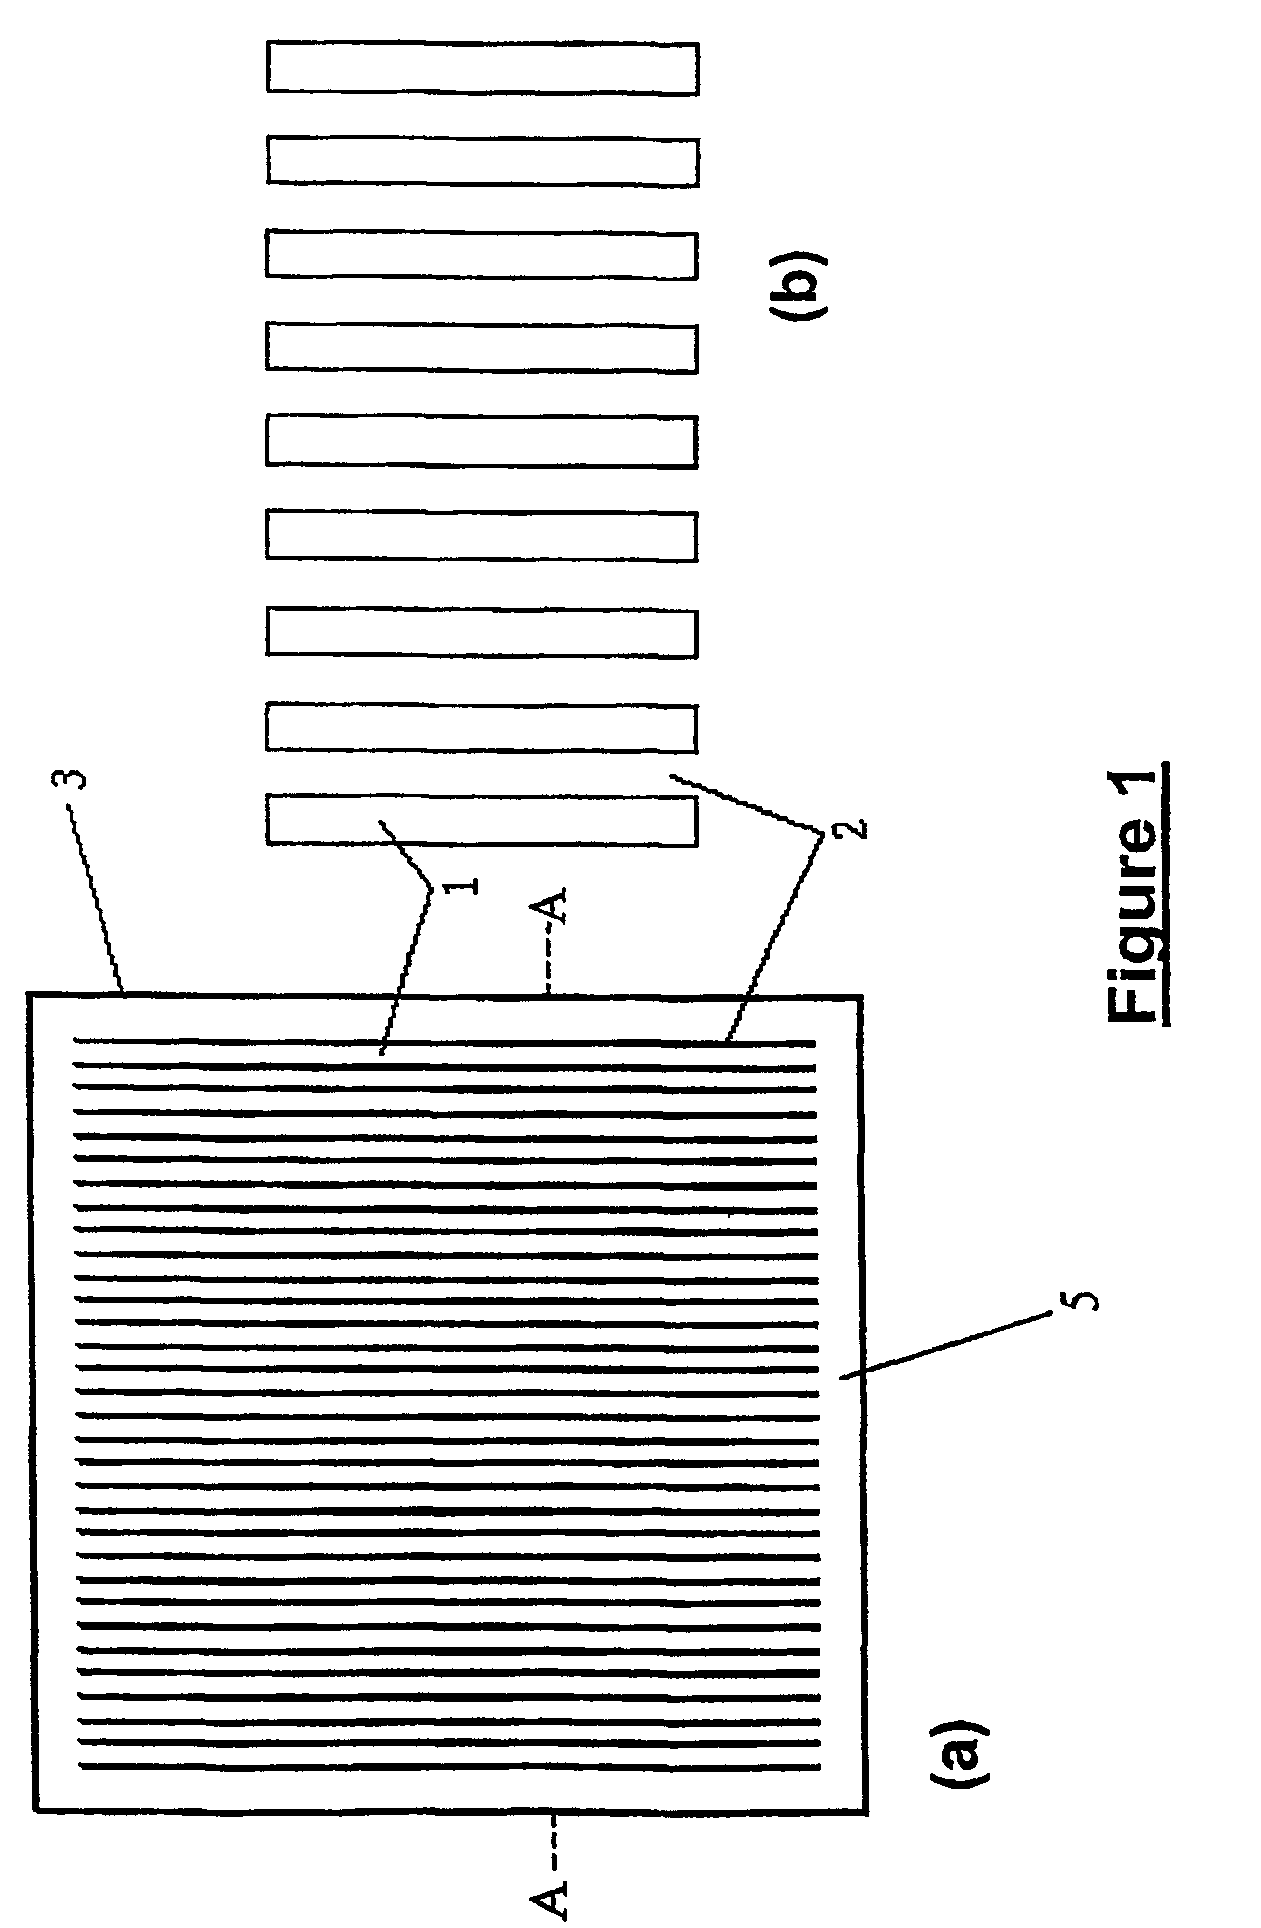 Semiconductor processing method for increasing usable surface area of a semiconductor wafer